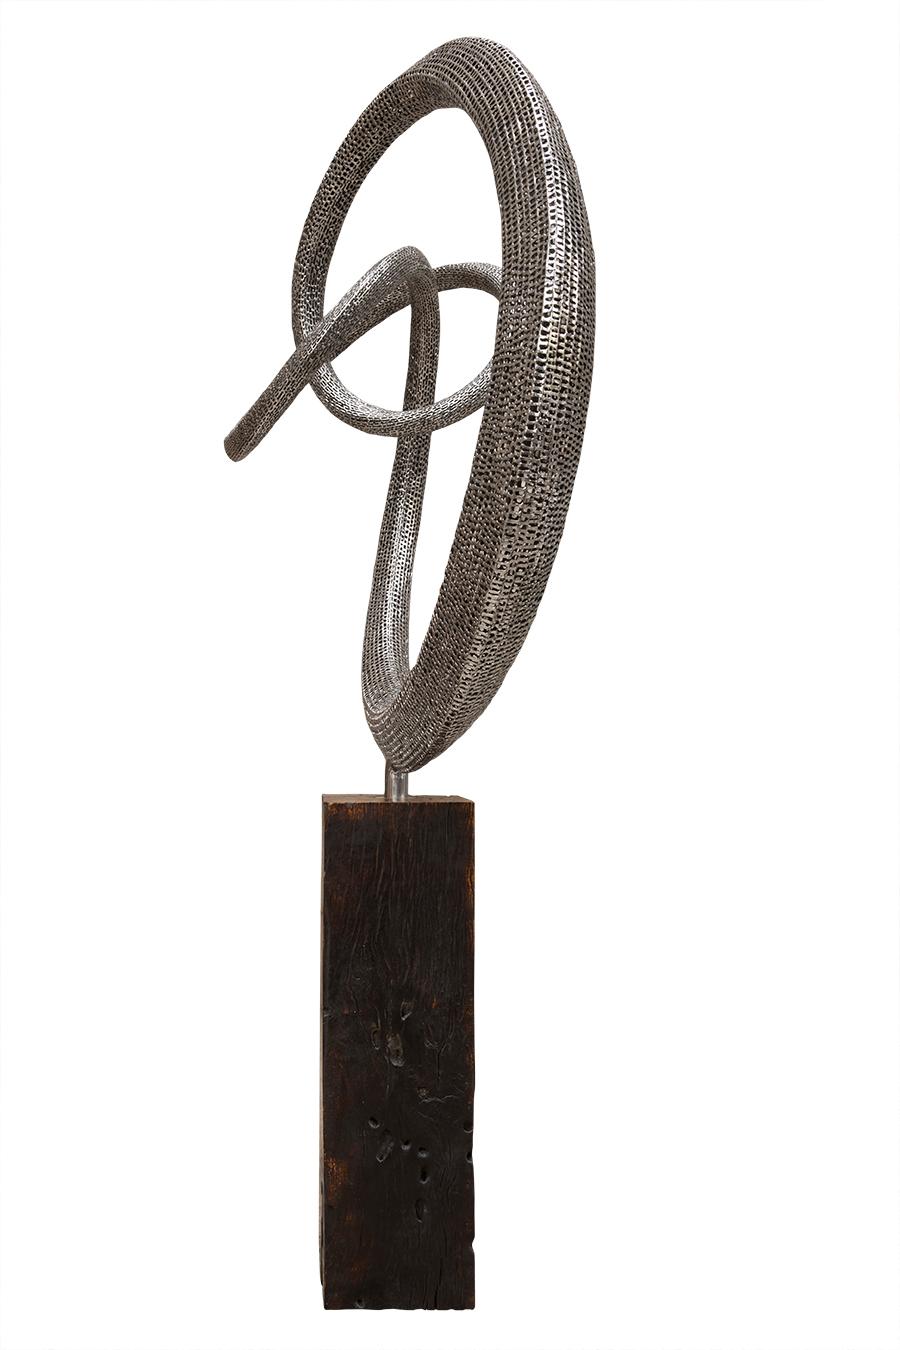 Oblivion - 21st Century, Contemporary, Abstract Sculpture, Stainless Steel 2